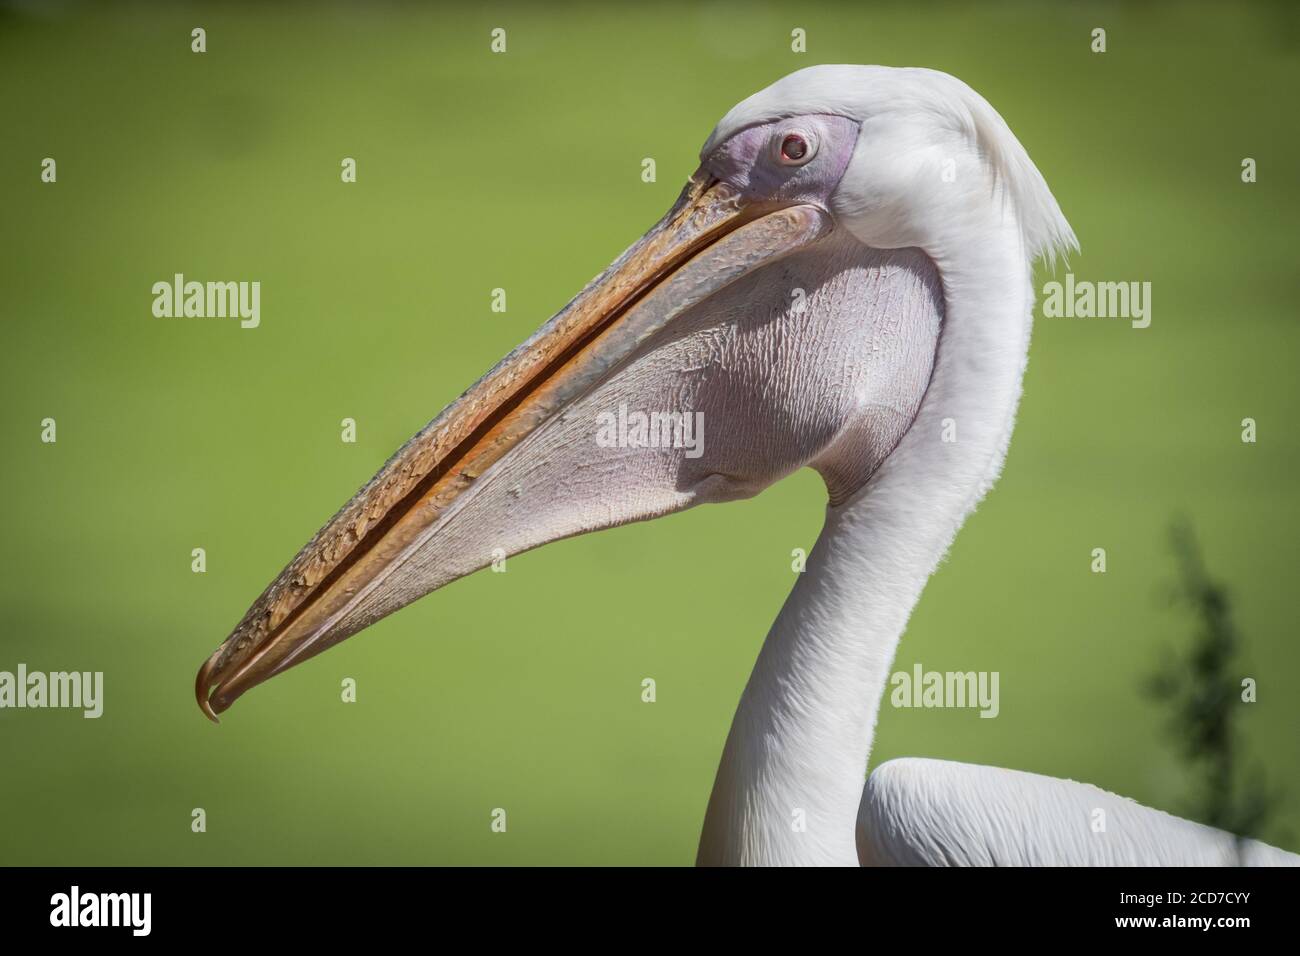 Isolated close up portrait of White Pelican bird- Israel Stock Photo